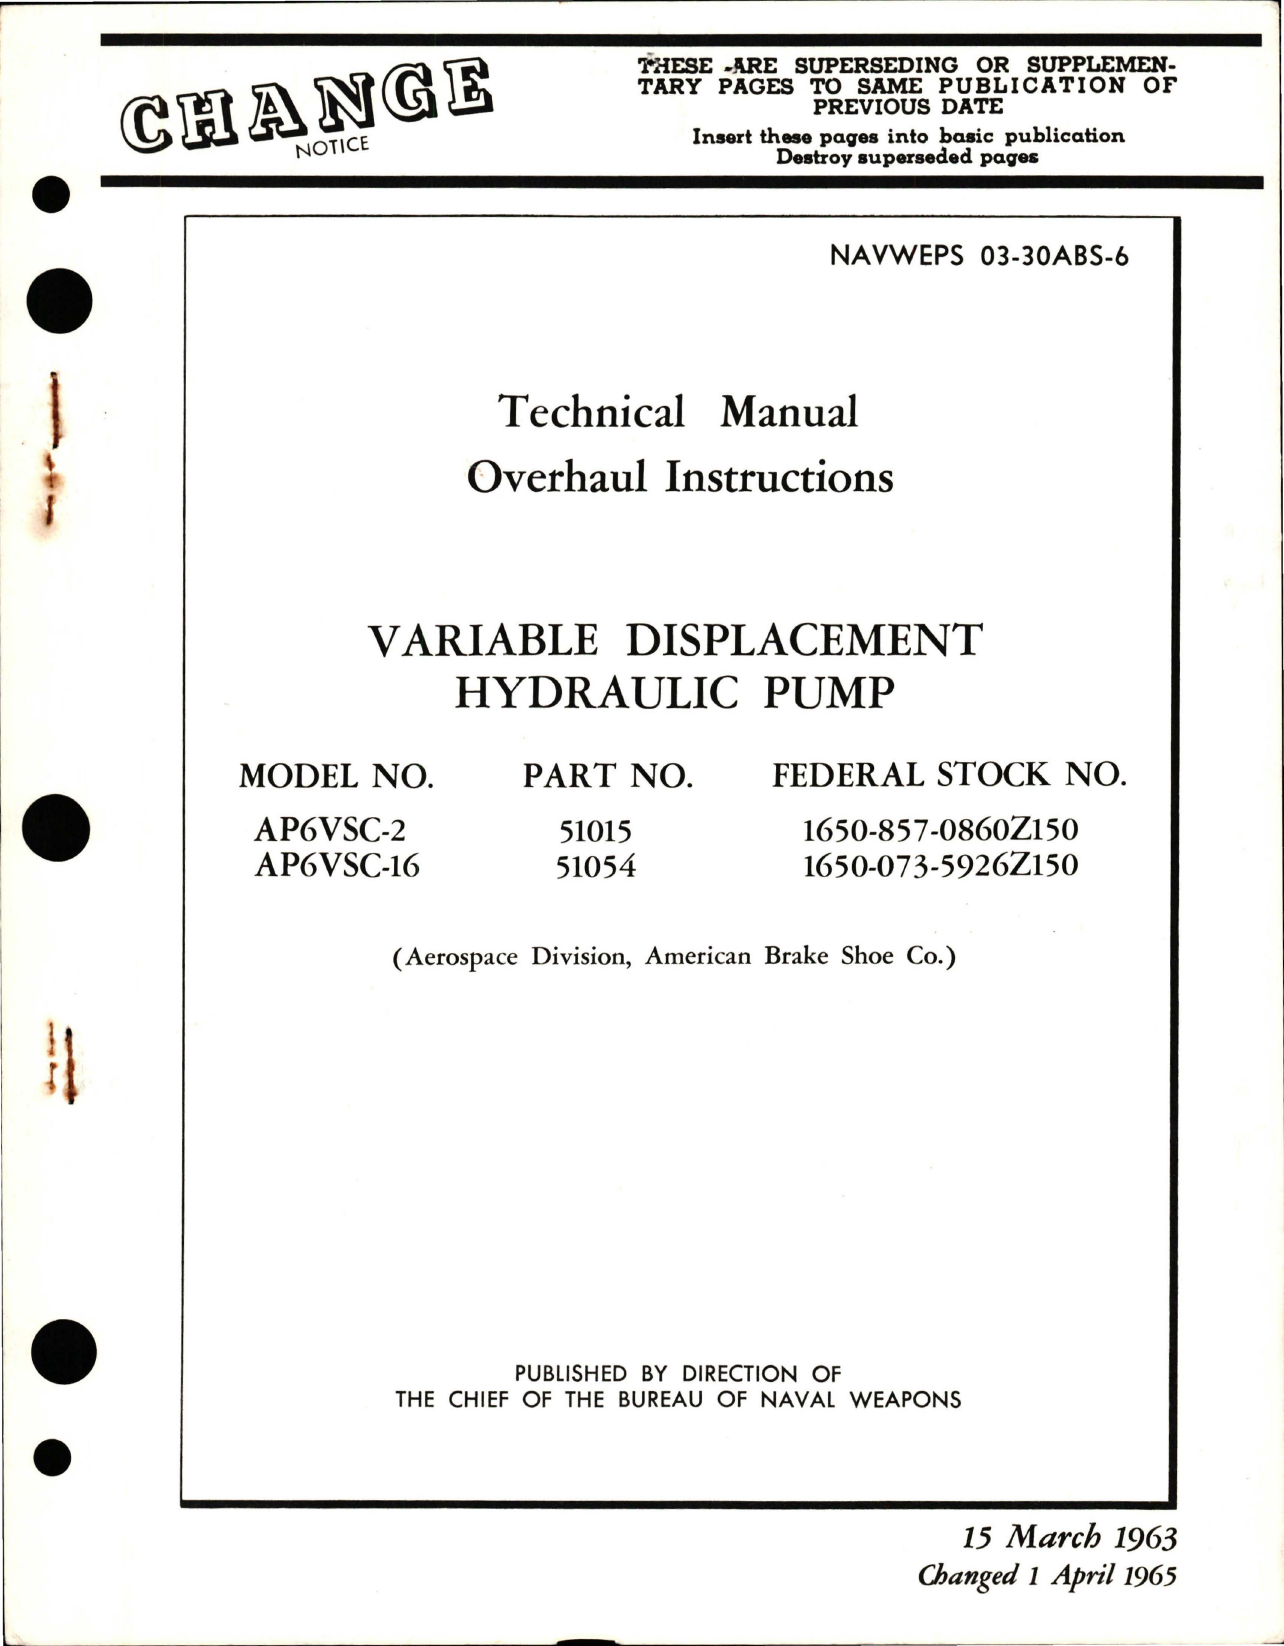 Sample page 1 from AirCorps Library document: Overhaul Instructions for Variable Displacement Hydraulic Pump - Model AP6VSC-2 and AP6VSC-16 - Parts 51015 and 51054